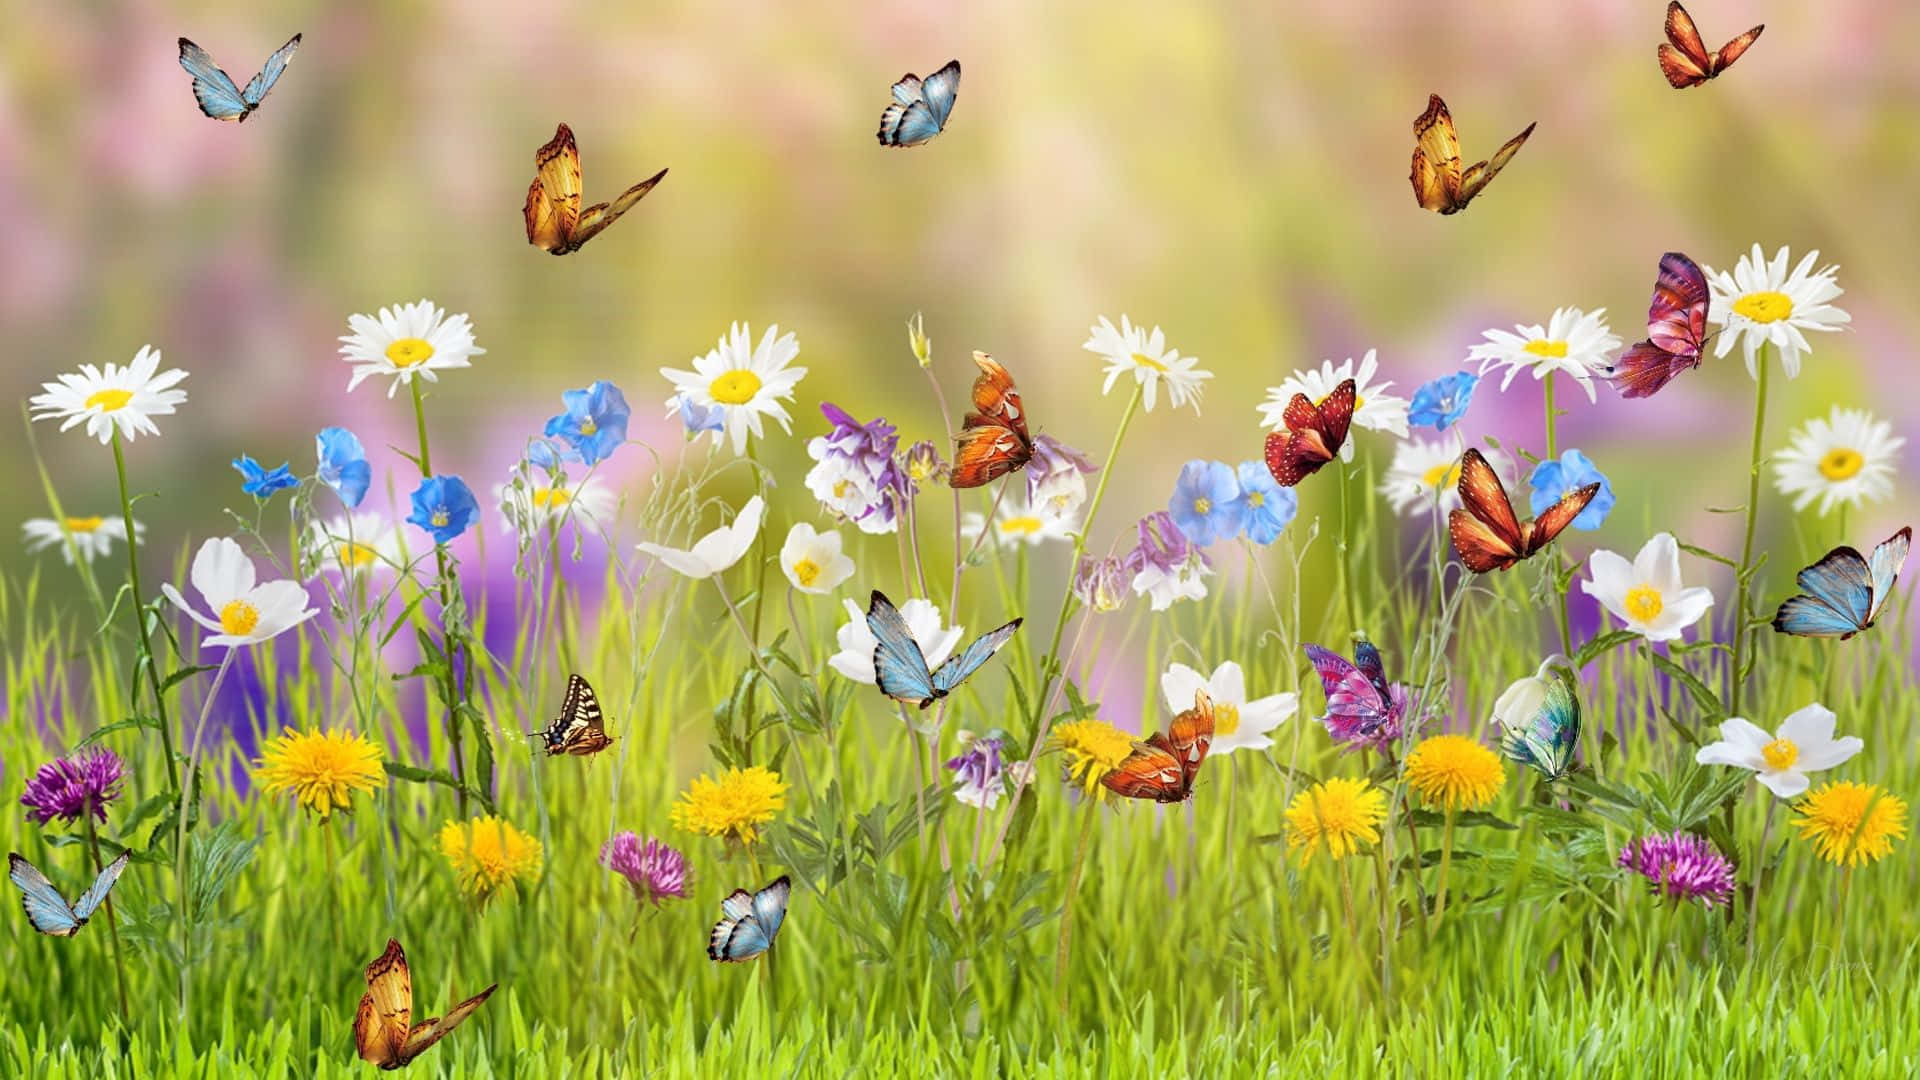 A Butterfly Sitting Amongst in a Garden Full of Colorful Flowers and Plants Wallpaper